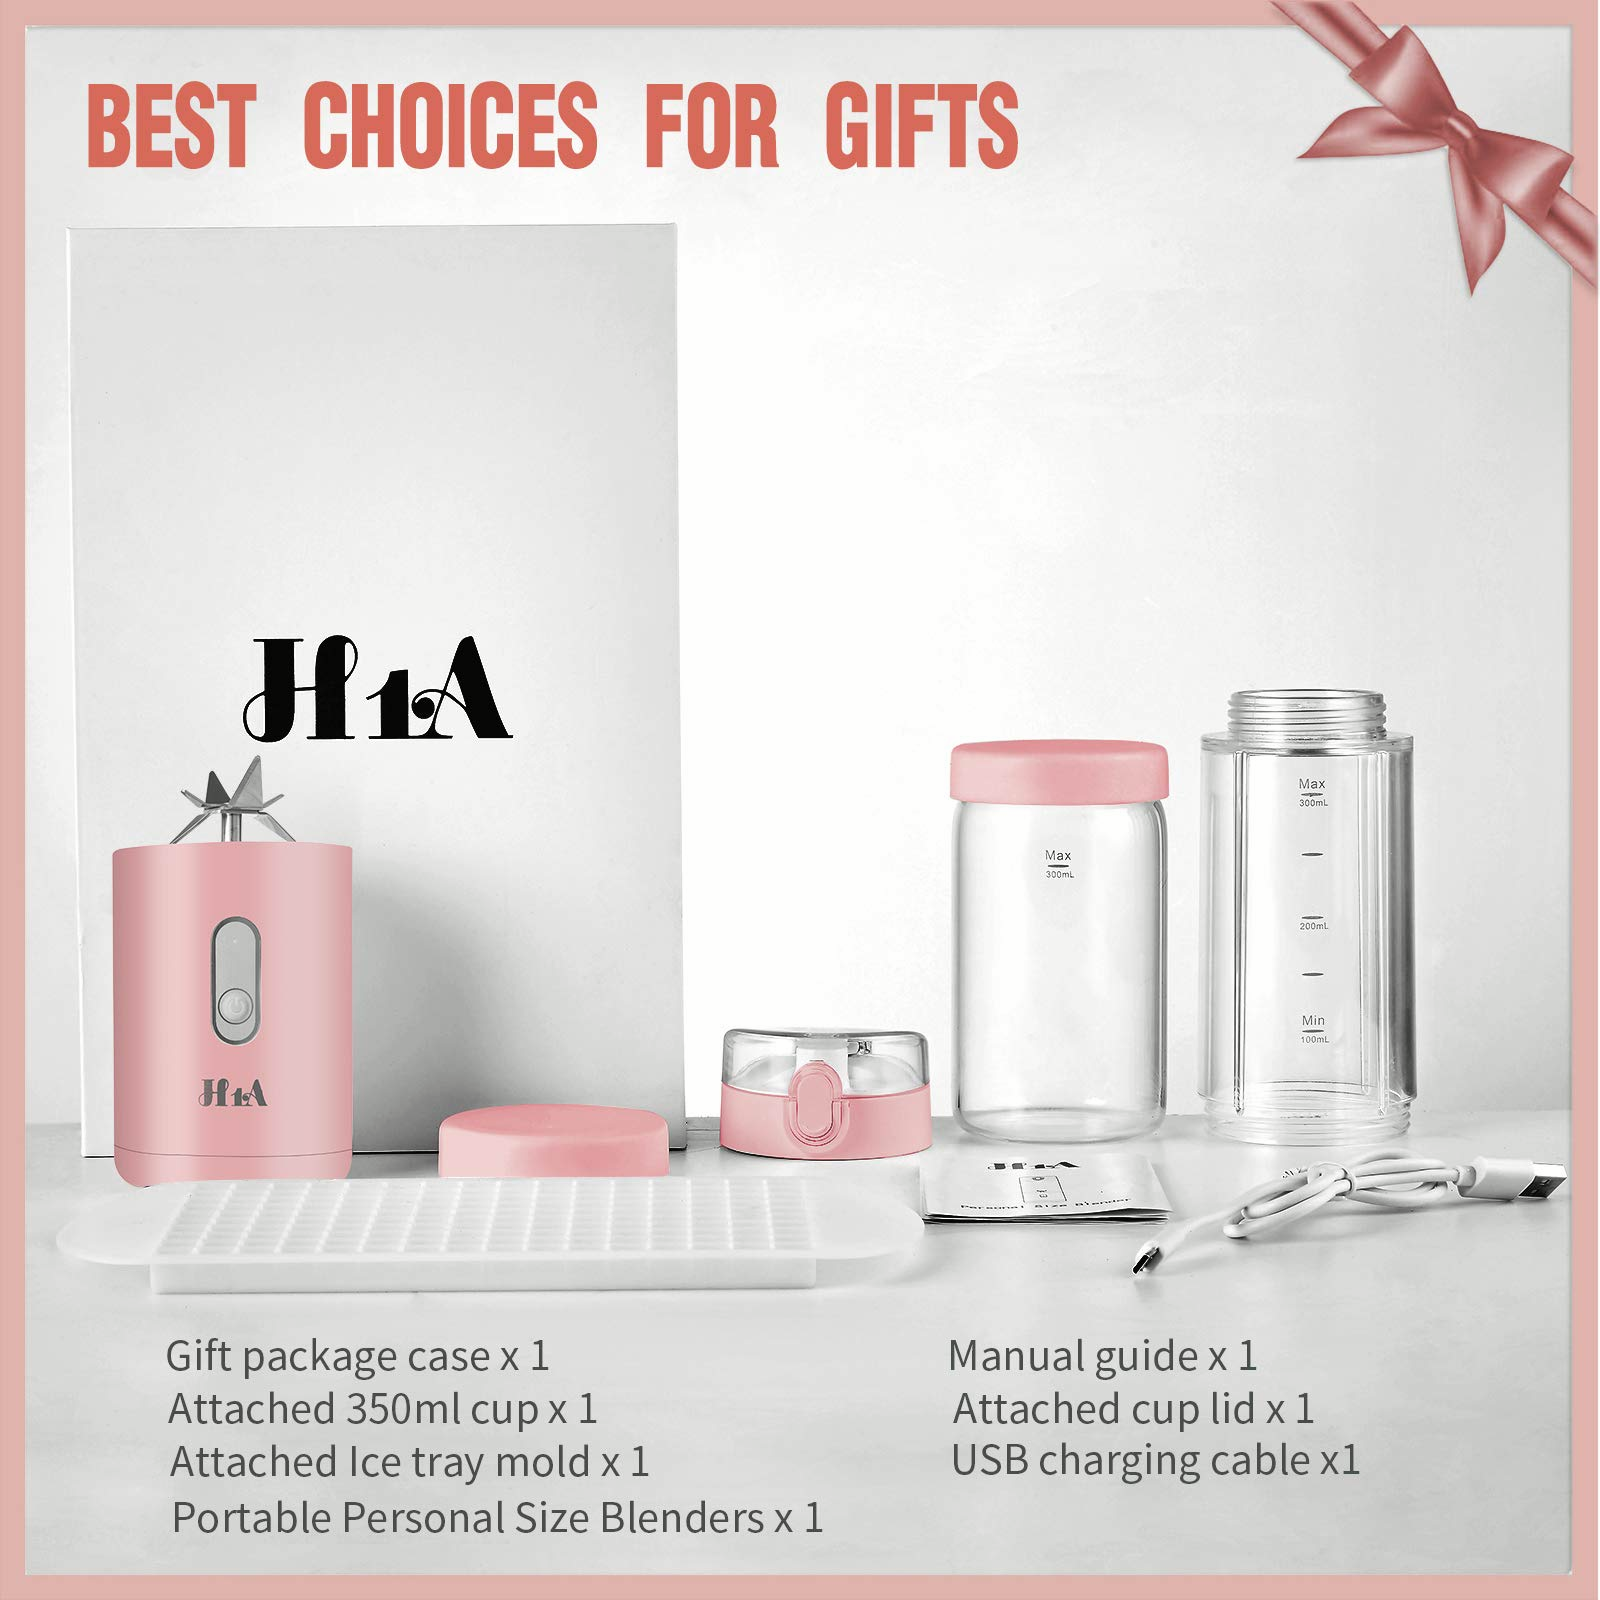 Portable blender, Mini Fruit Juicer Cup, Personal Small Electric Juice Mixer  Machine with USB Rechargeable 4000mAh Battery Powered 380ML Travel Bottle 